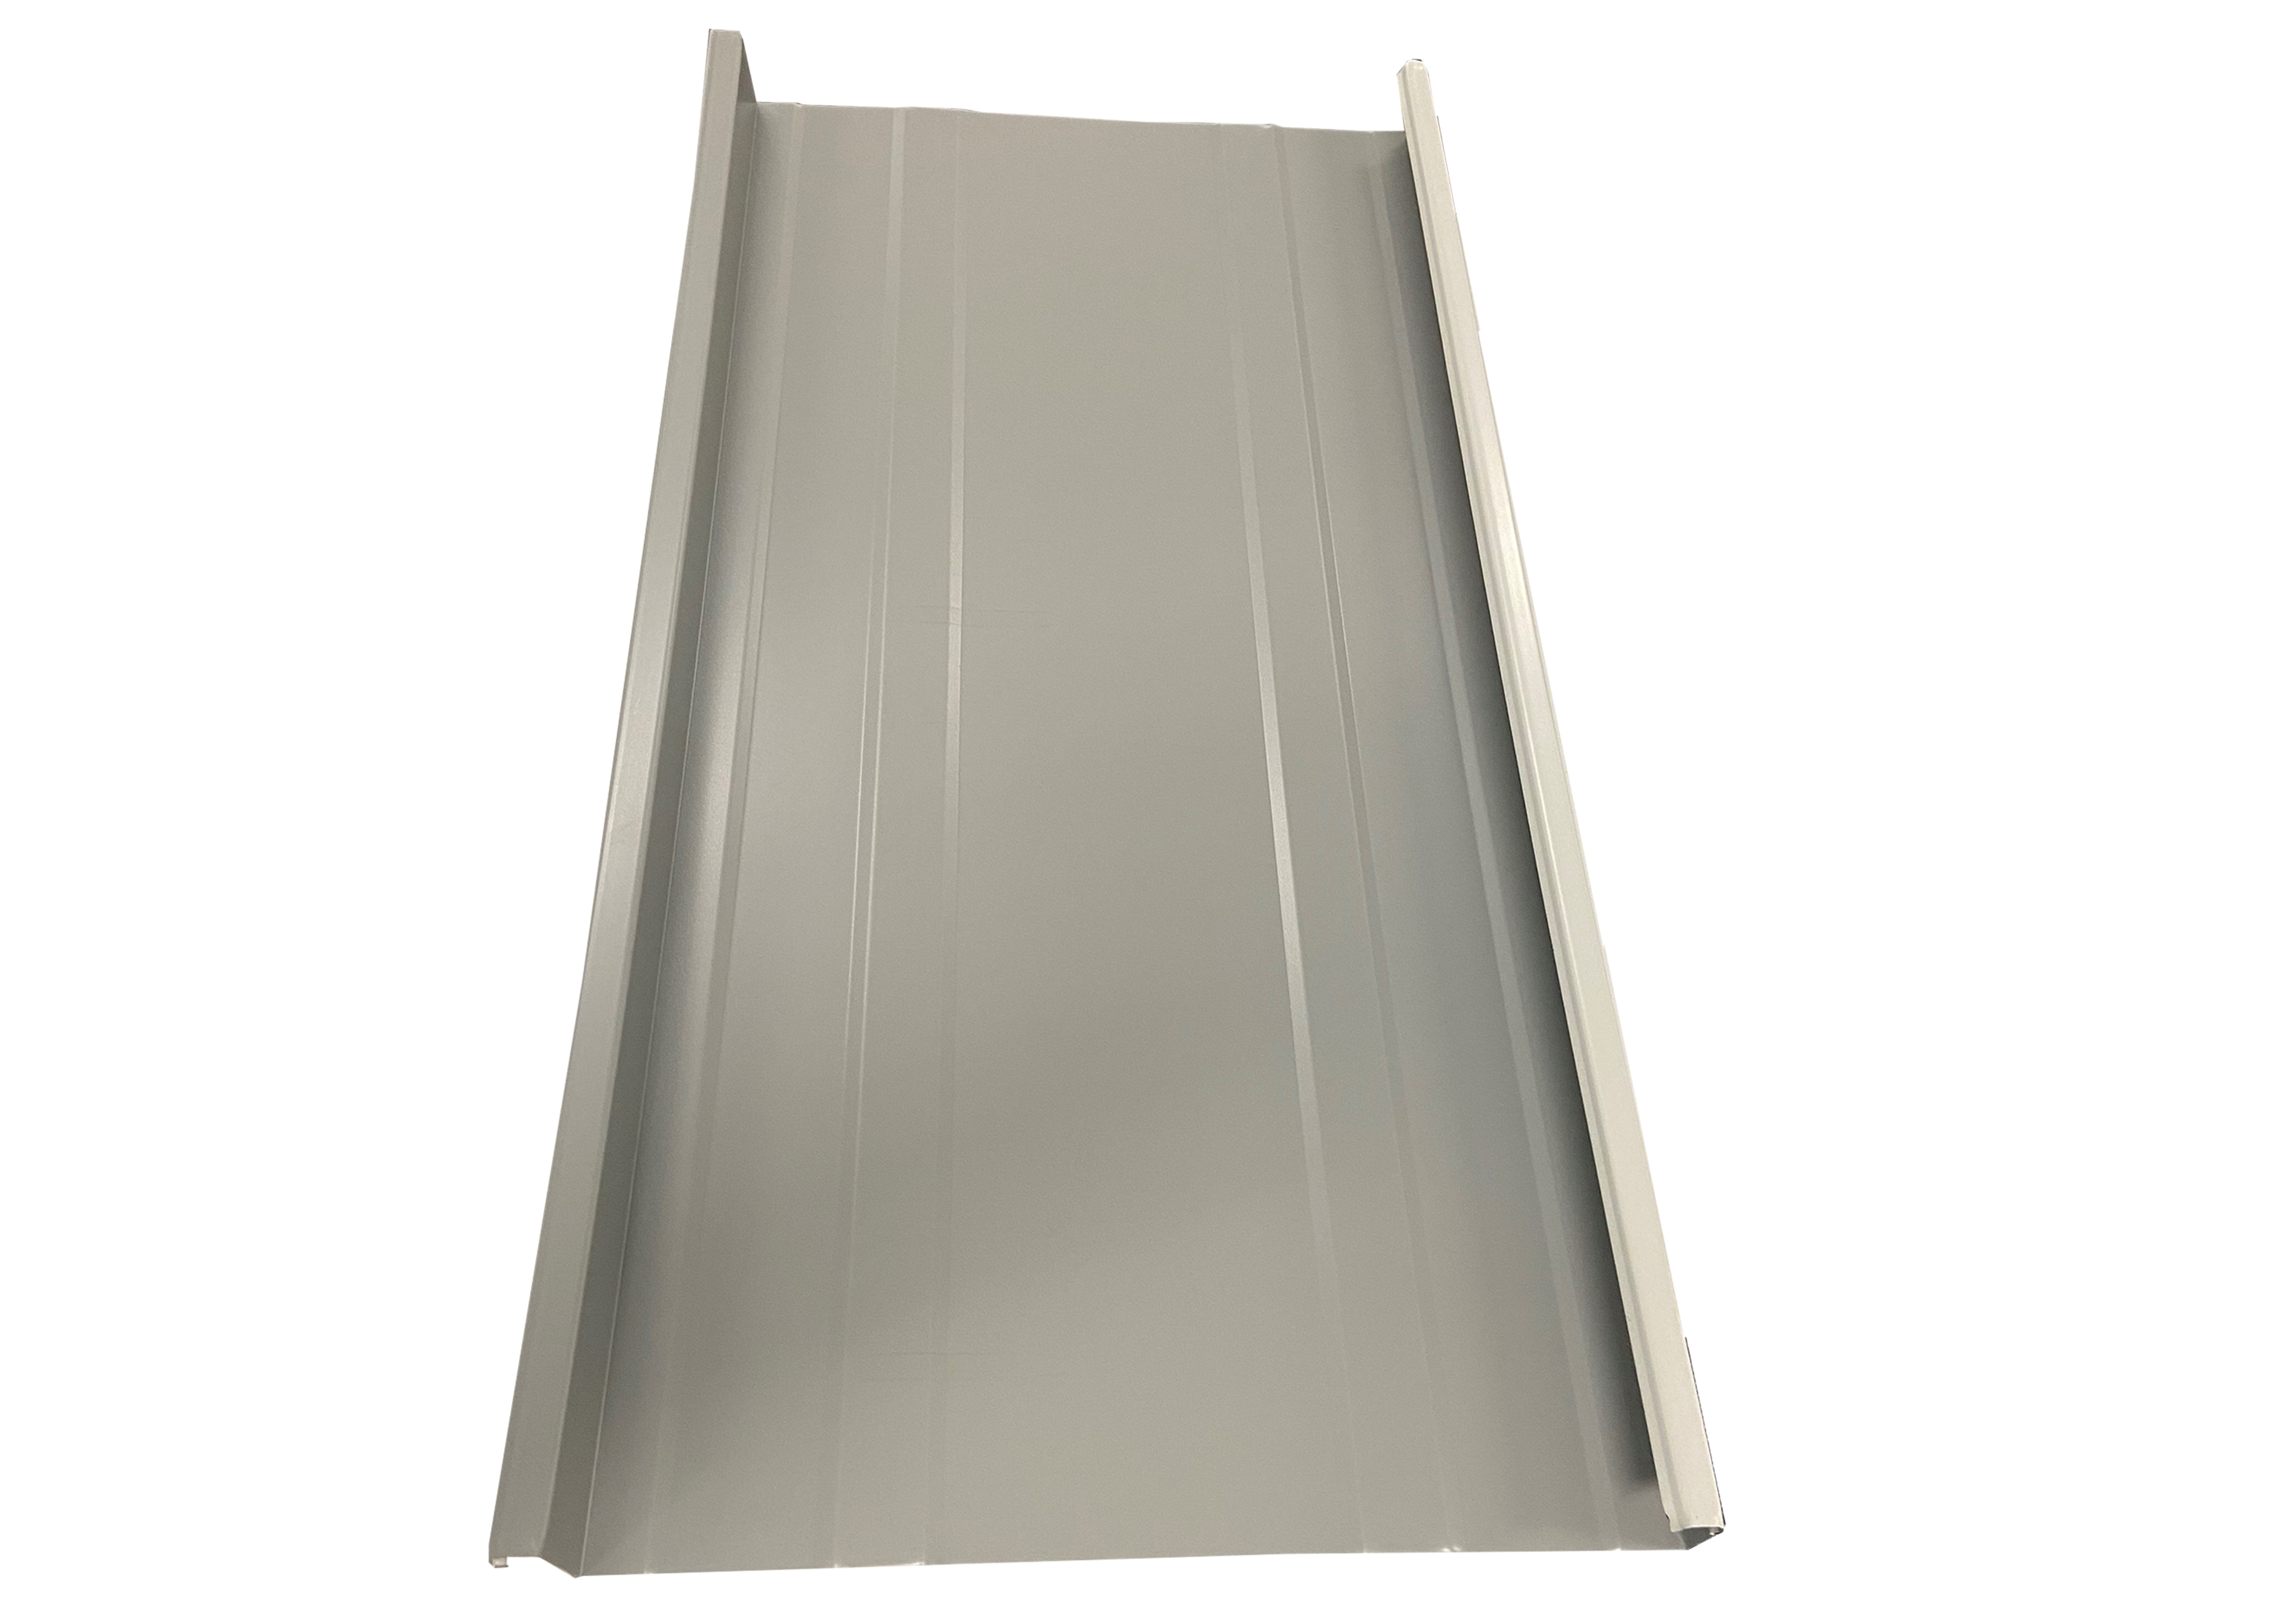 SSQ-275 Metal Roofing Panel